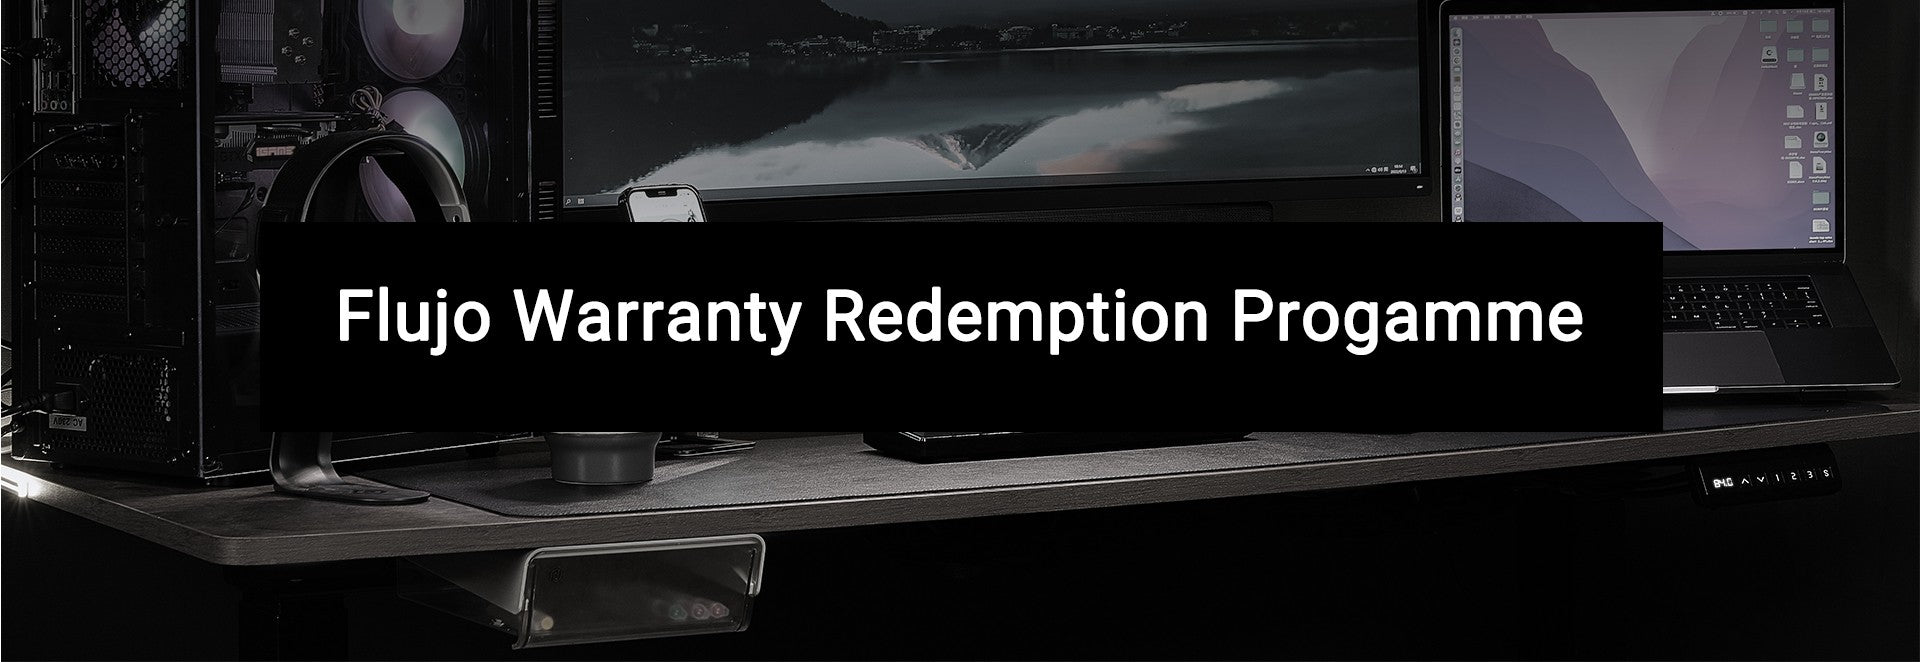 Promotional banner for Flujo Warranty Redemption Programme with a dark, sleek desk setup featuring a computer case, monitor, and accessories.